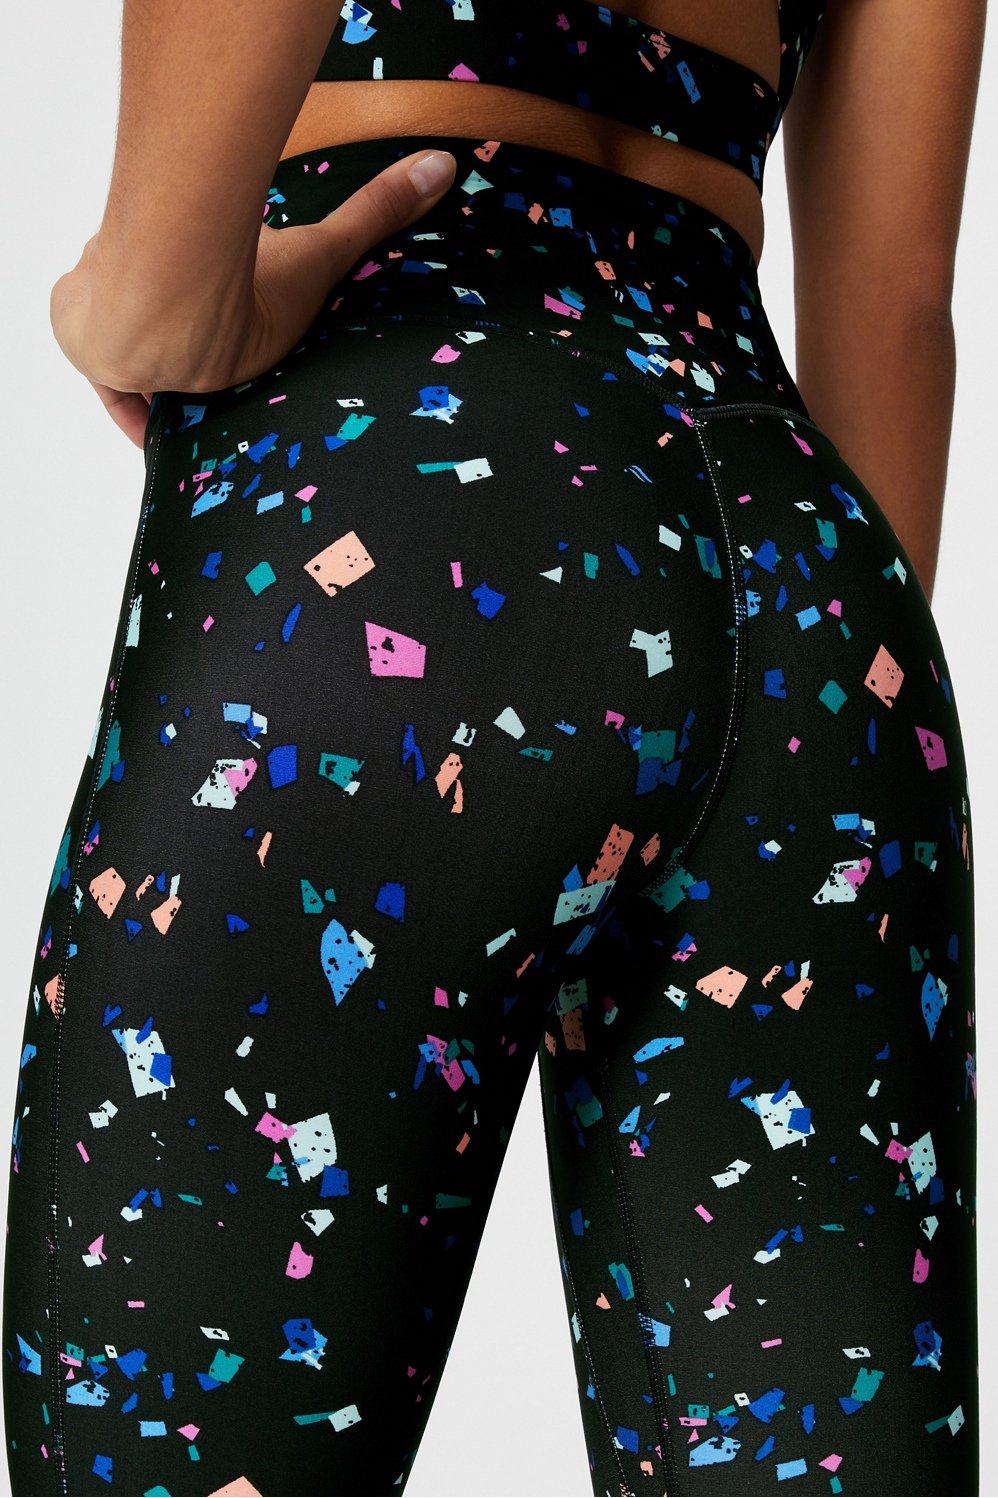 Motion 365 made by Fabletics Black Active Pants Size 3X (Plus) - 66% off